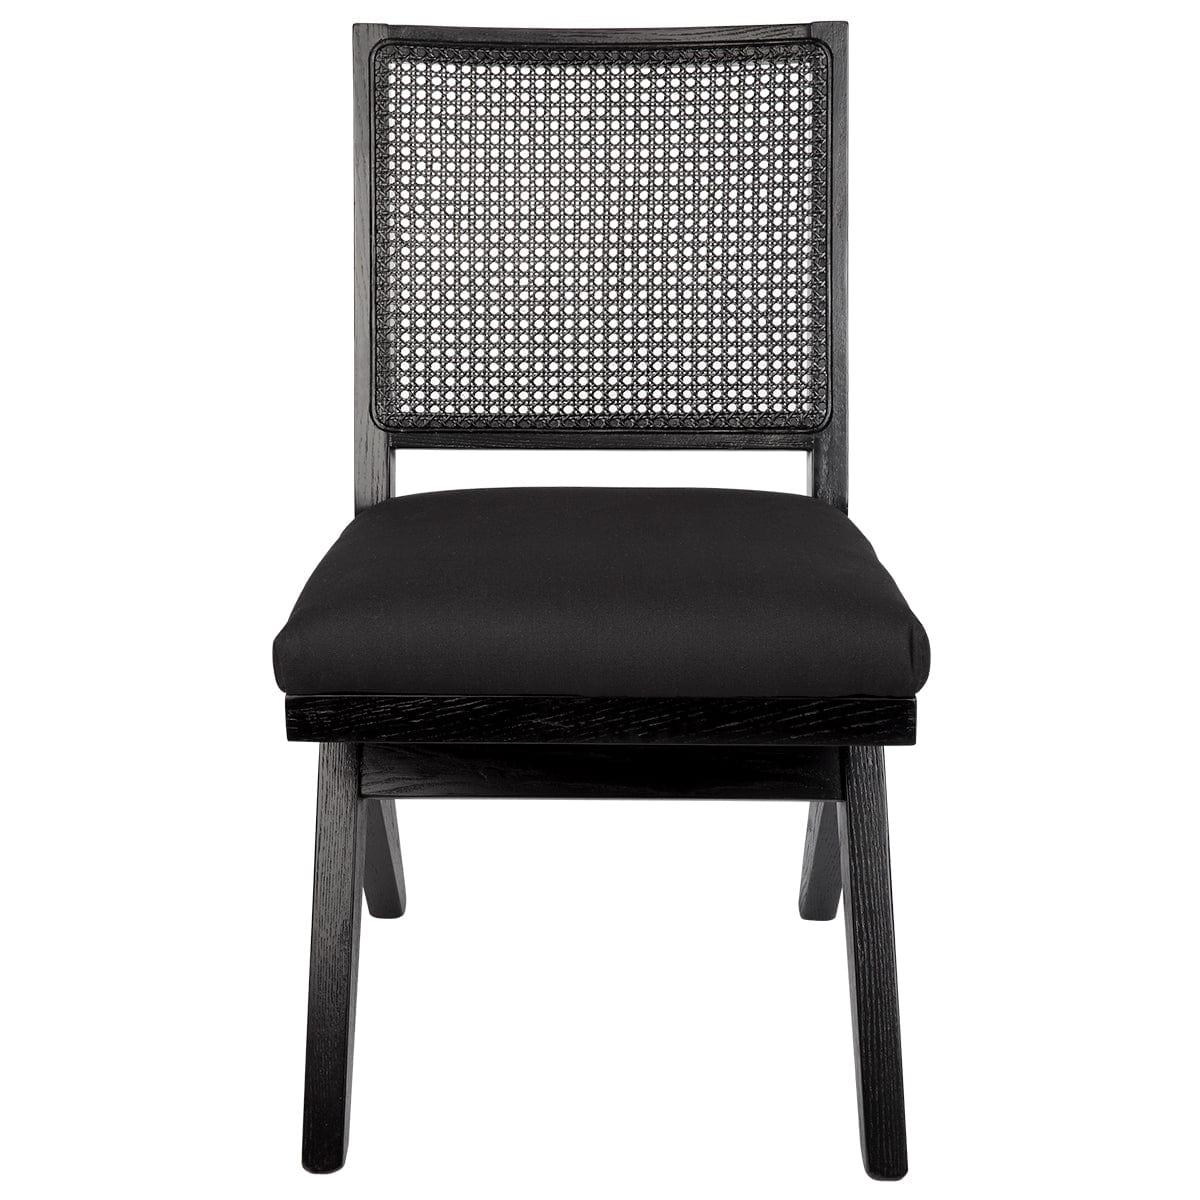 The Imperial Rattan Black Dining Chair - Black Linen.